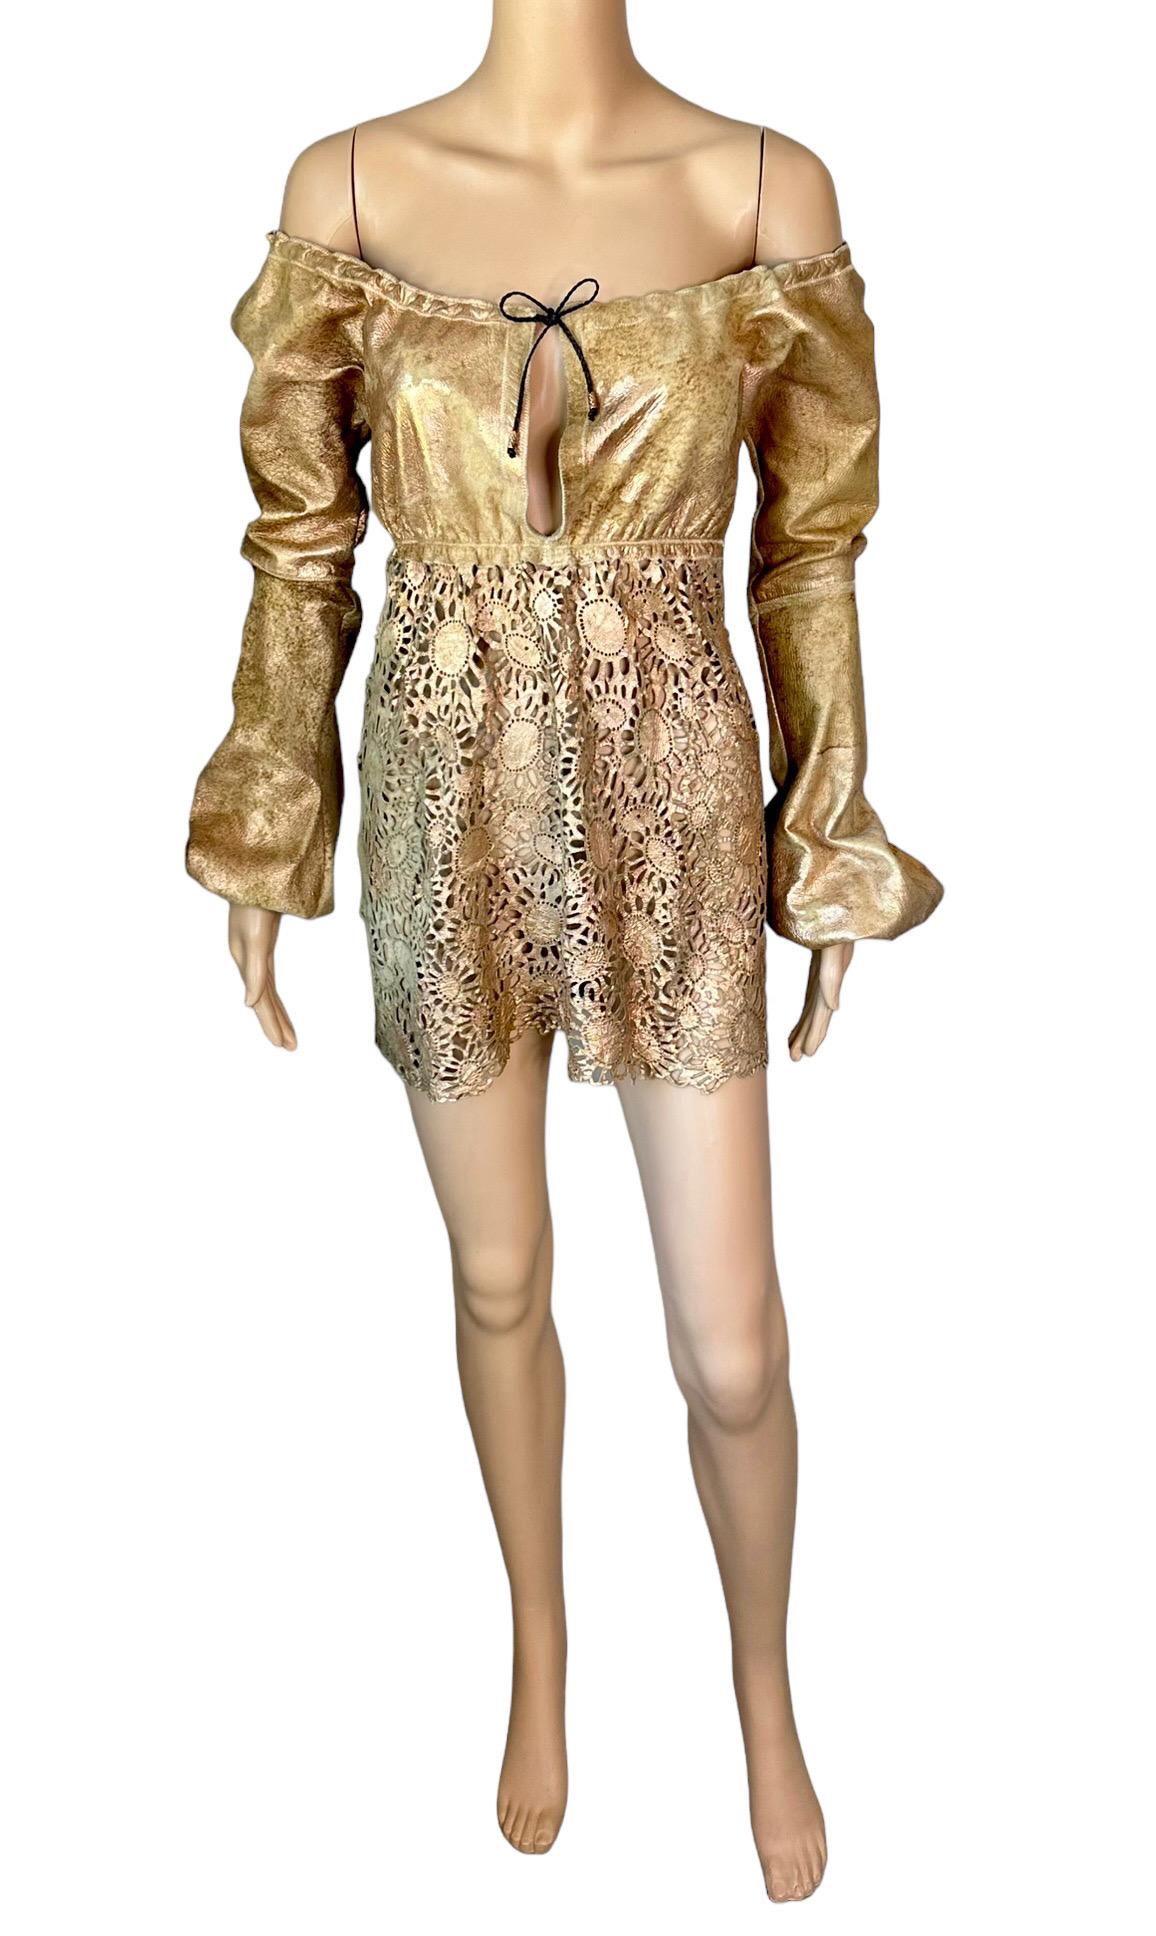 Roberto Cavalli S/S 2002 Runway Metallic Leather Off Shoulder Eyelet Mini Dress In Good Condition For Sale In Naples, FL